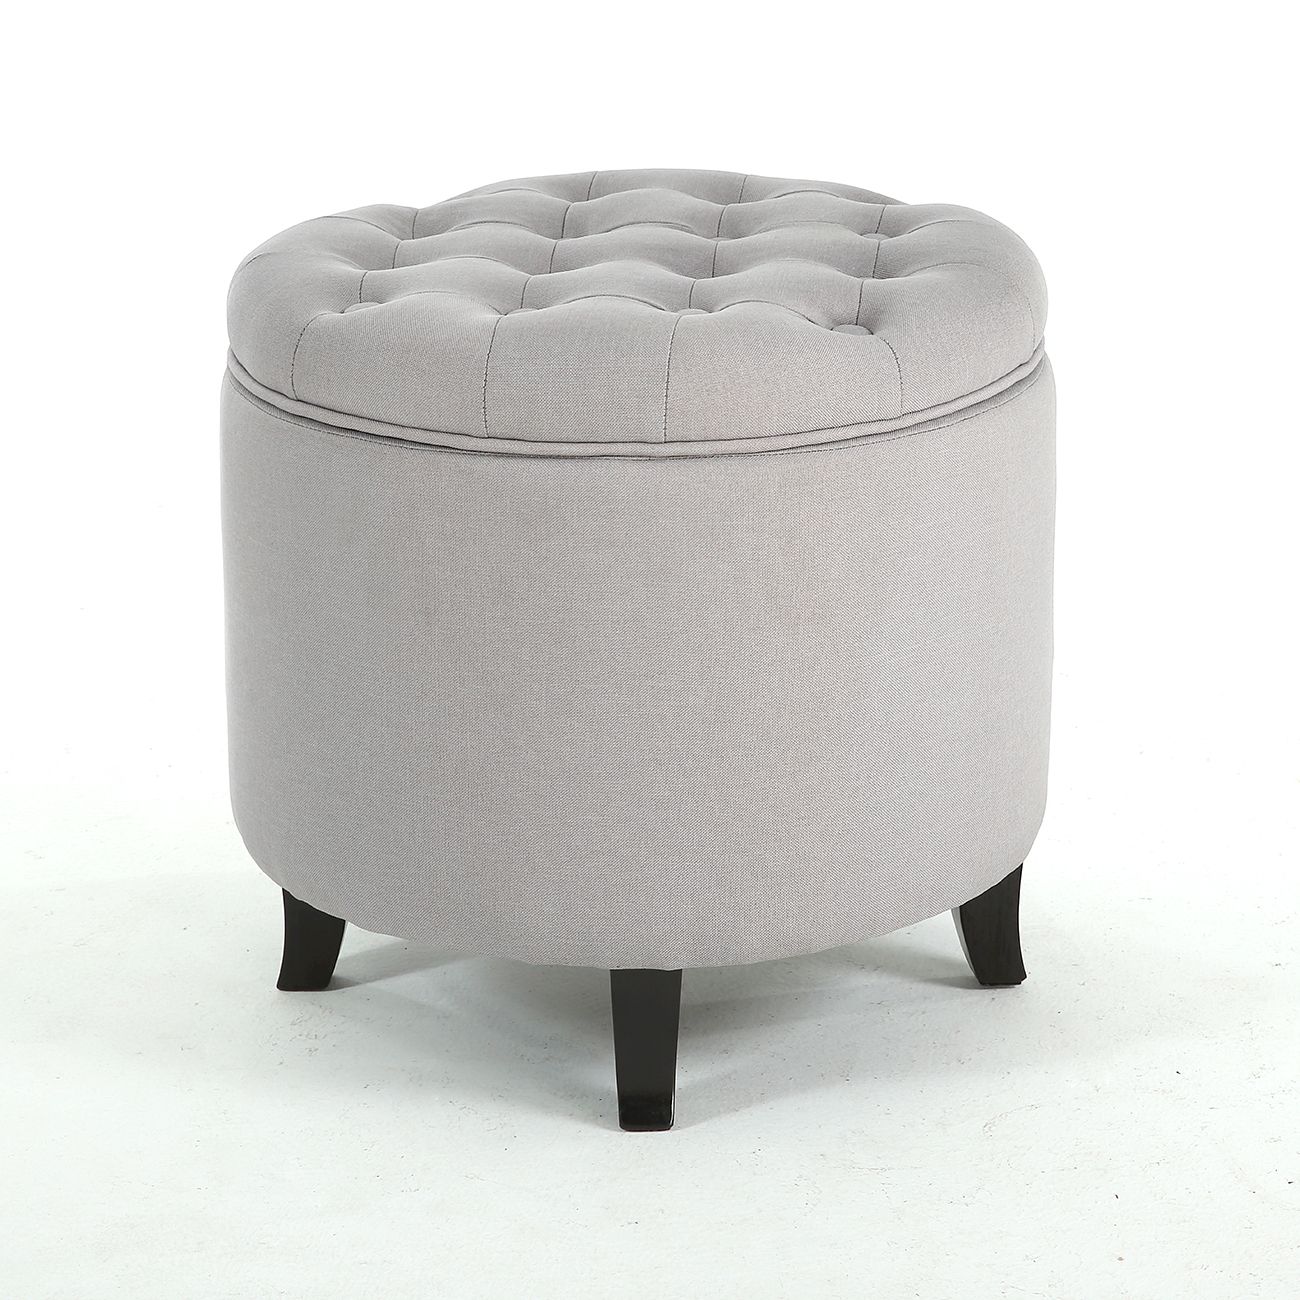 Light Gray Fabric Tufted Round Storage Ottomans Regarding Most Up To Date Classic Storage Ottoman Seat Nailhead Trim Large Round Tufted Table (View 7 of 10)